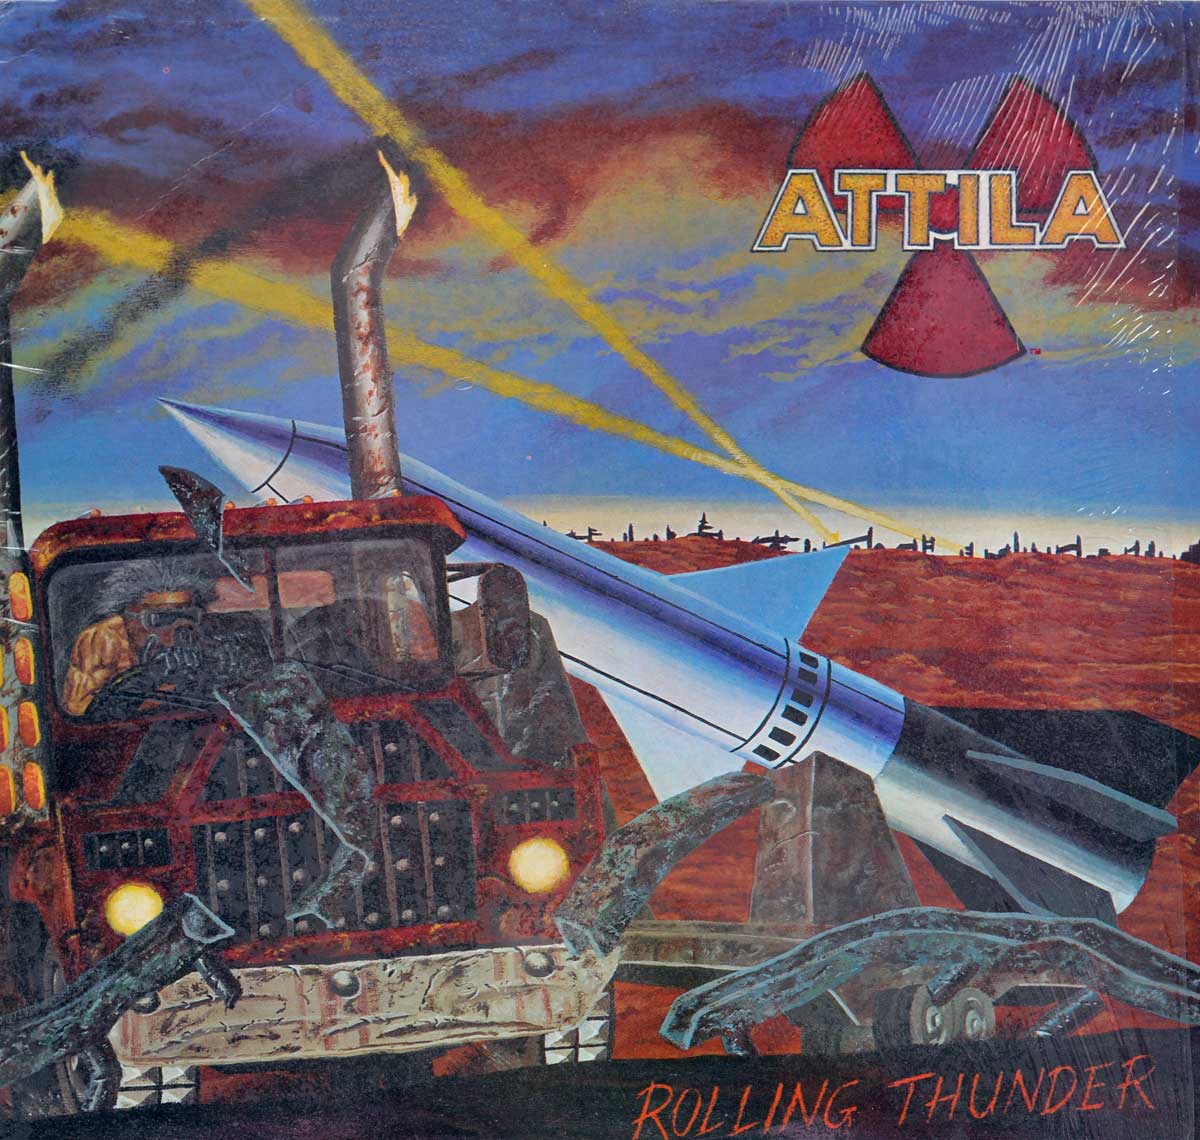 large album front cover photo of: ATTILA - Rolling Thunder (USA) 